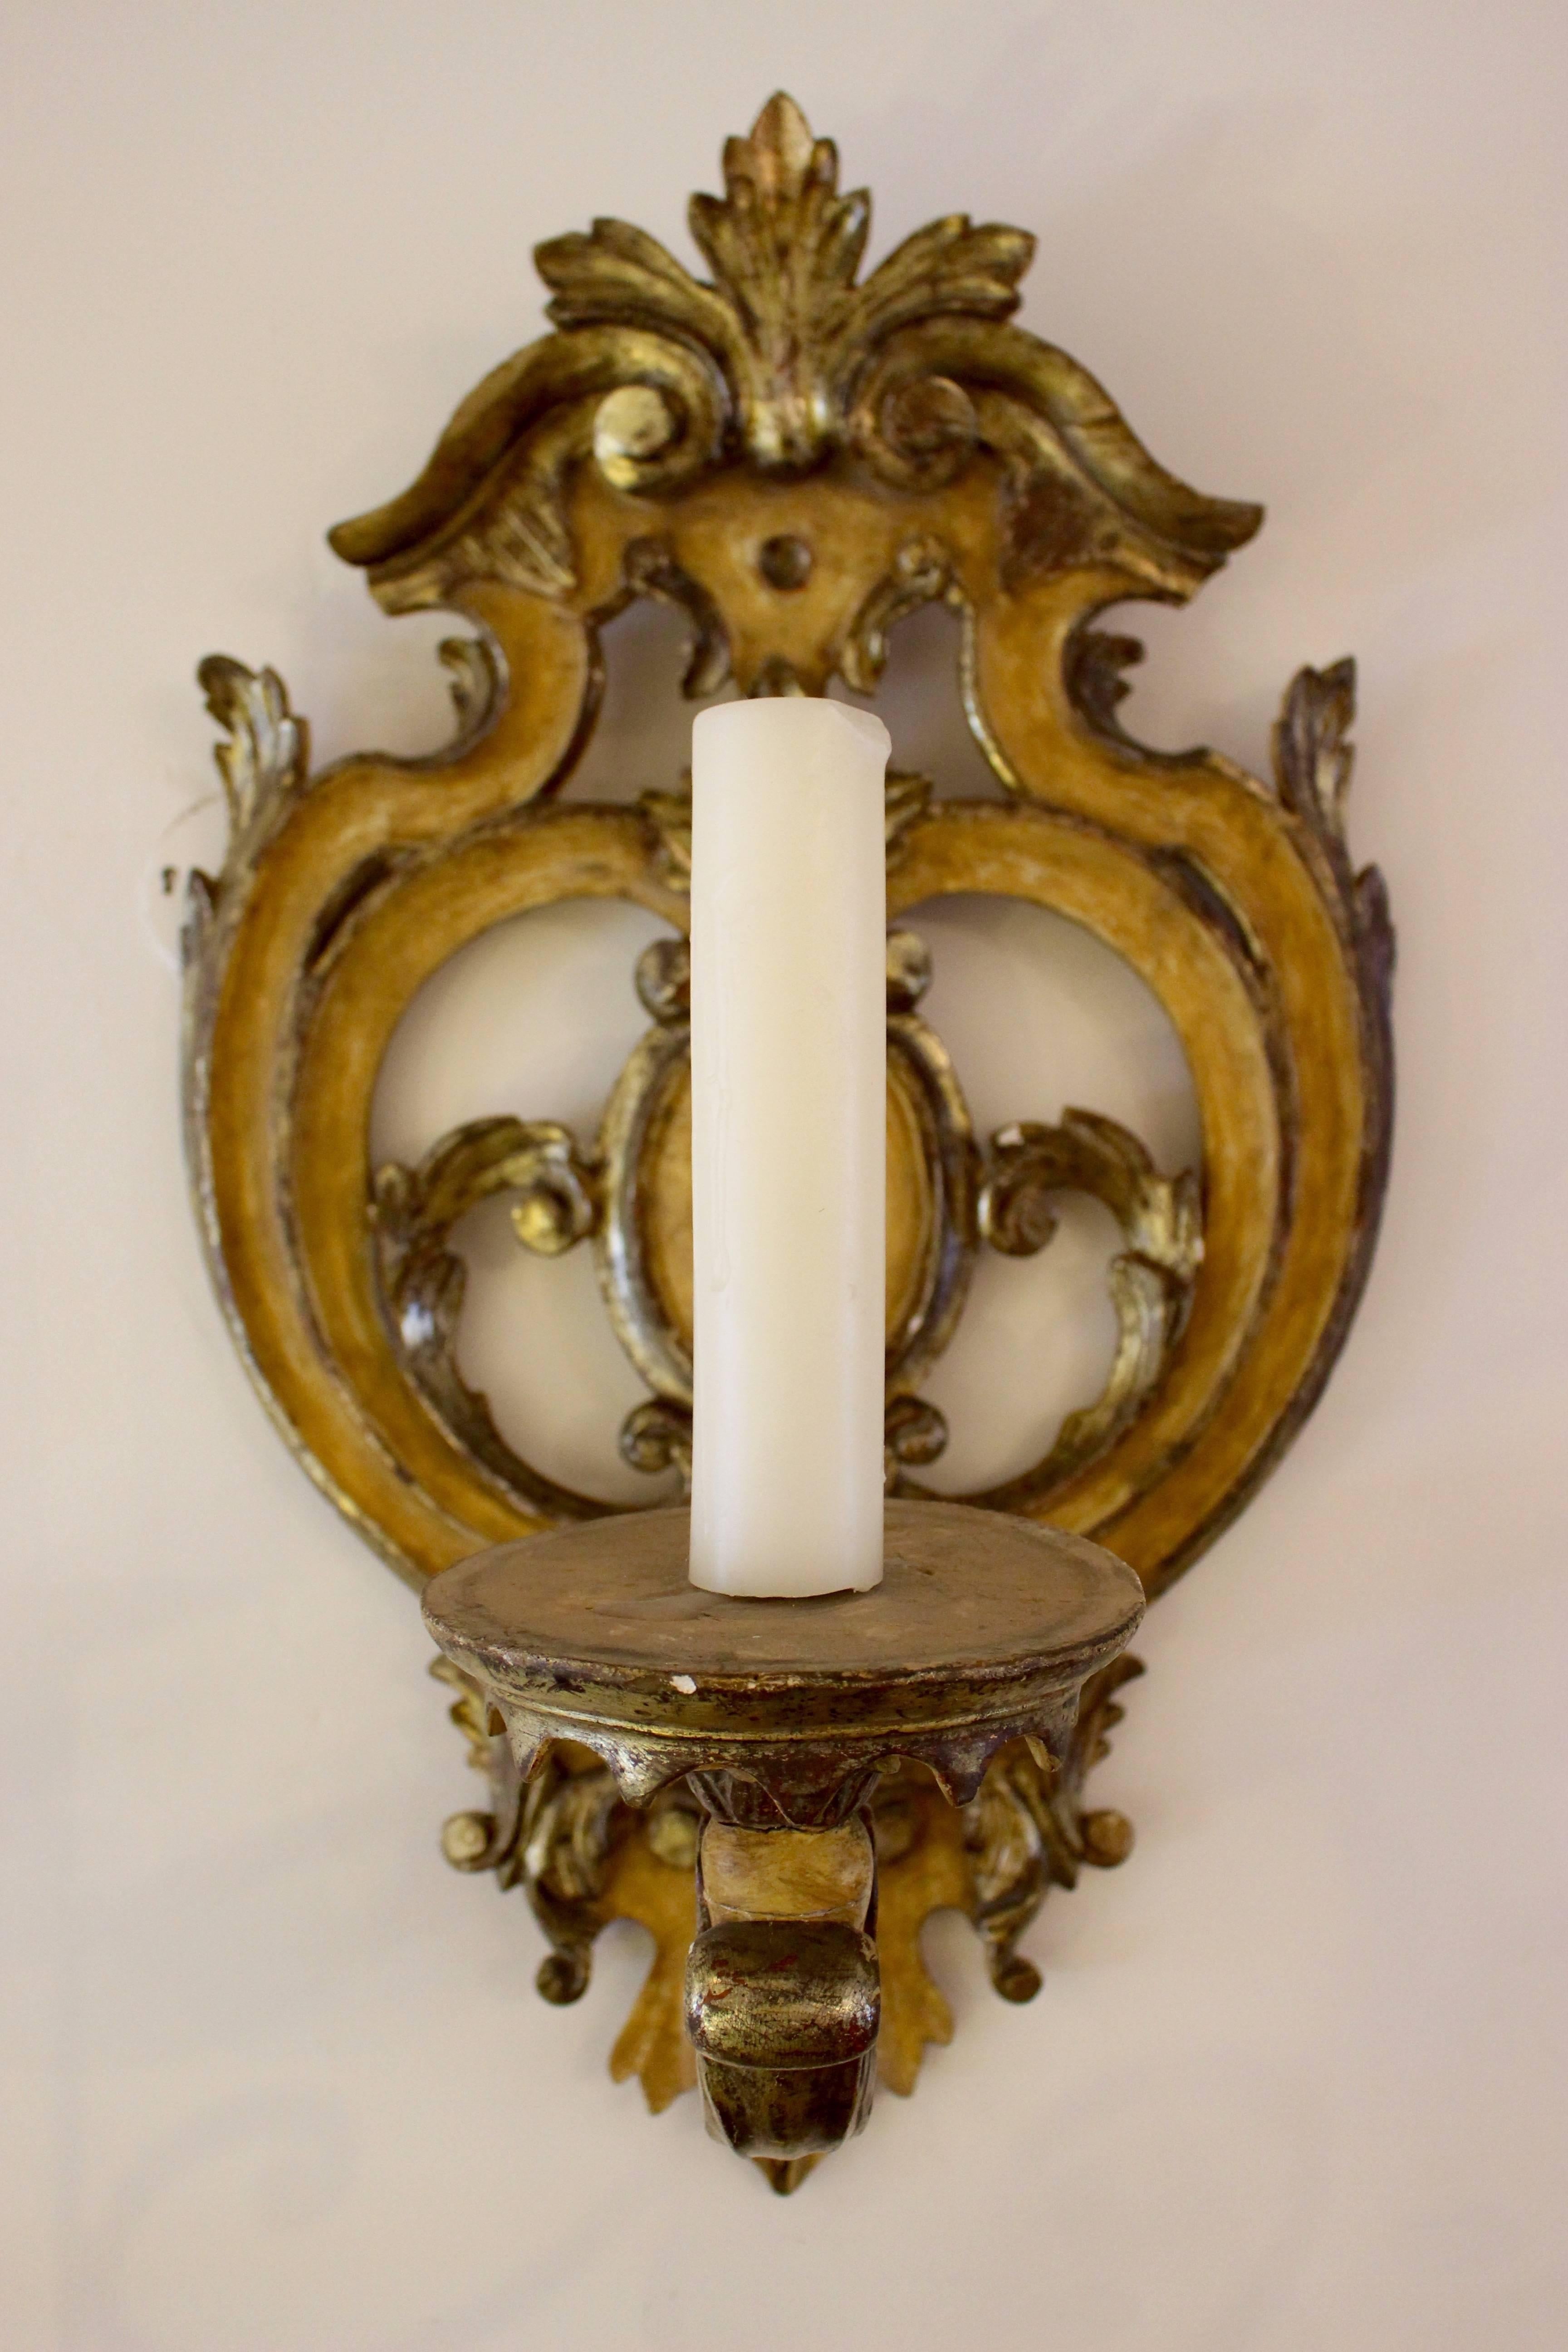 An Italian Baroque wooden carved parcel-gilt and ochre painted one-light wall sconce from the first half of the 18th century. The beautifully shaped and pierced backplate presents a central medallion framed by elaborate symmetrical foliate scrolls